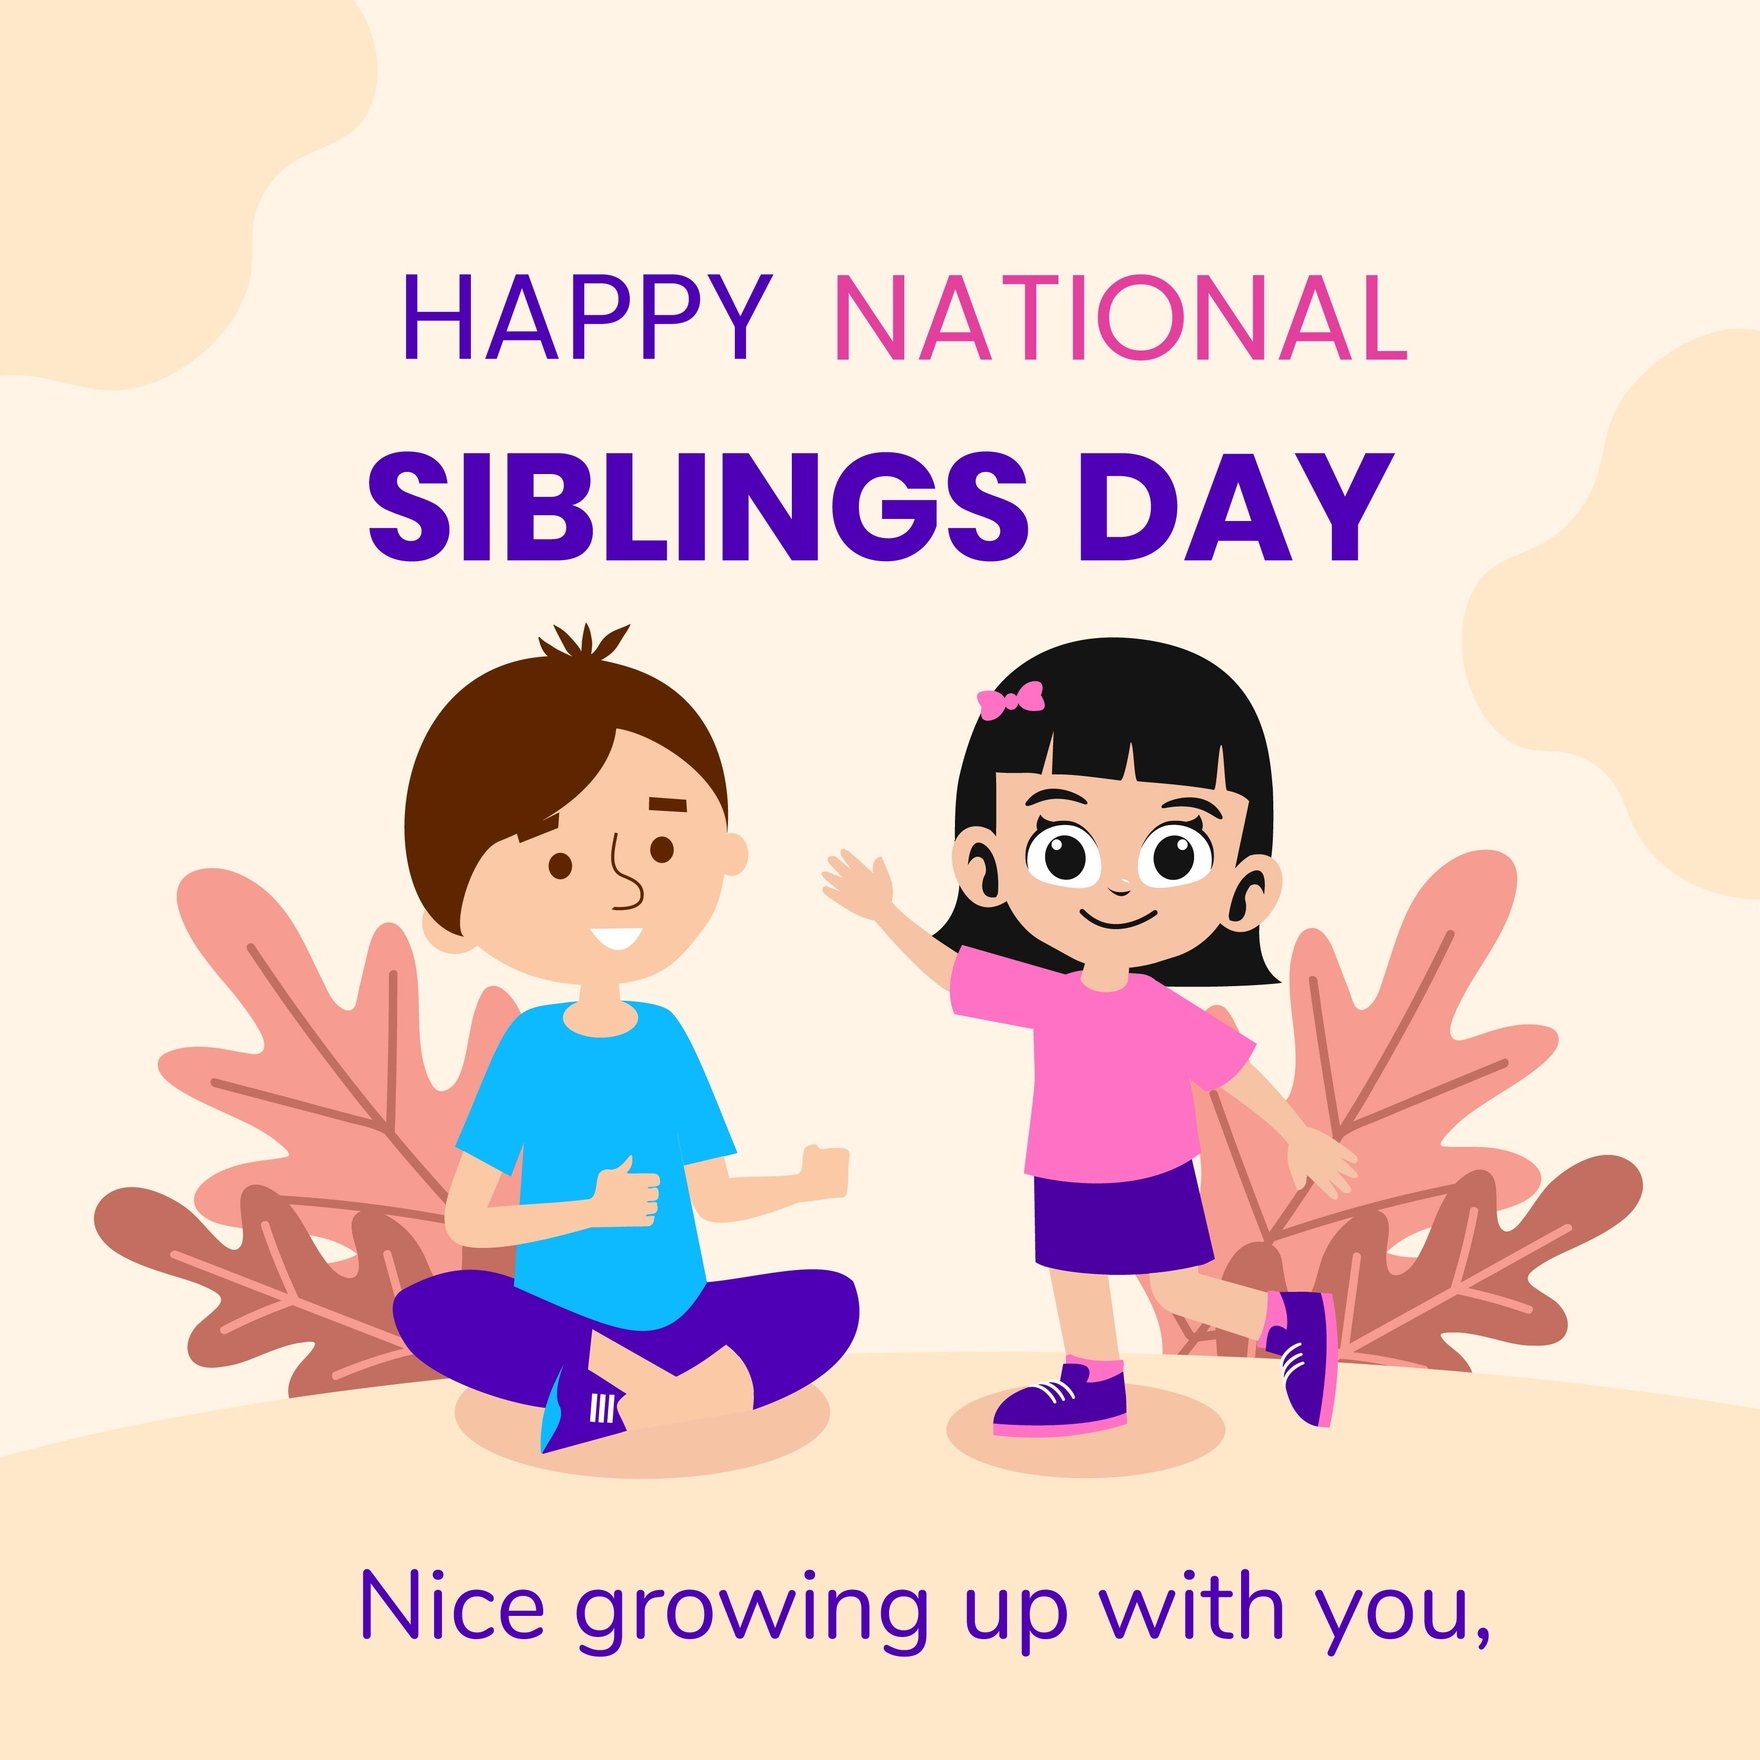 National Siblings Day WhatsApp Post in Illustrator, PSD, EPS, SVG, PNG, JPEG